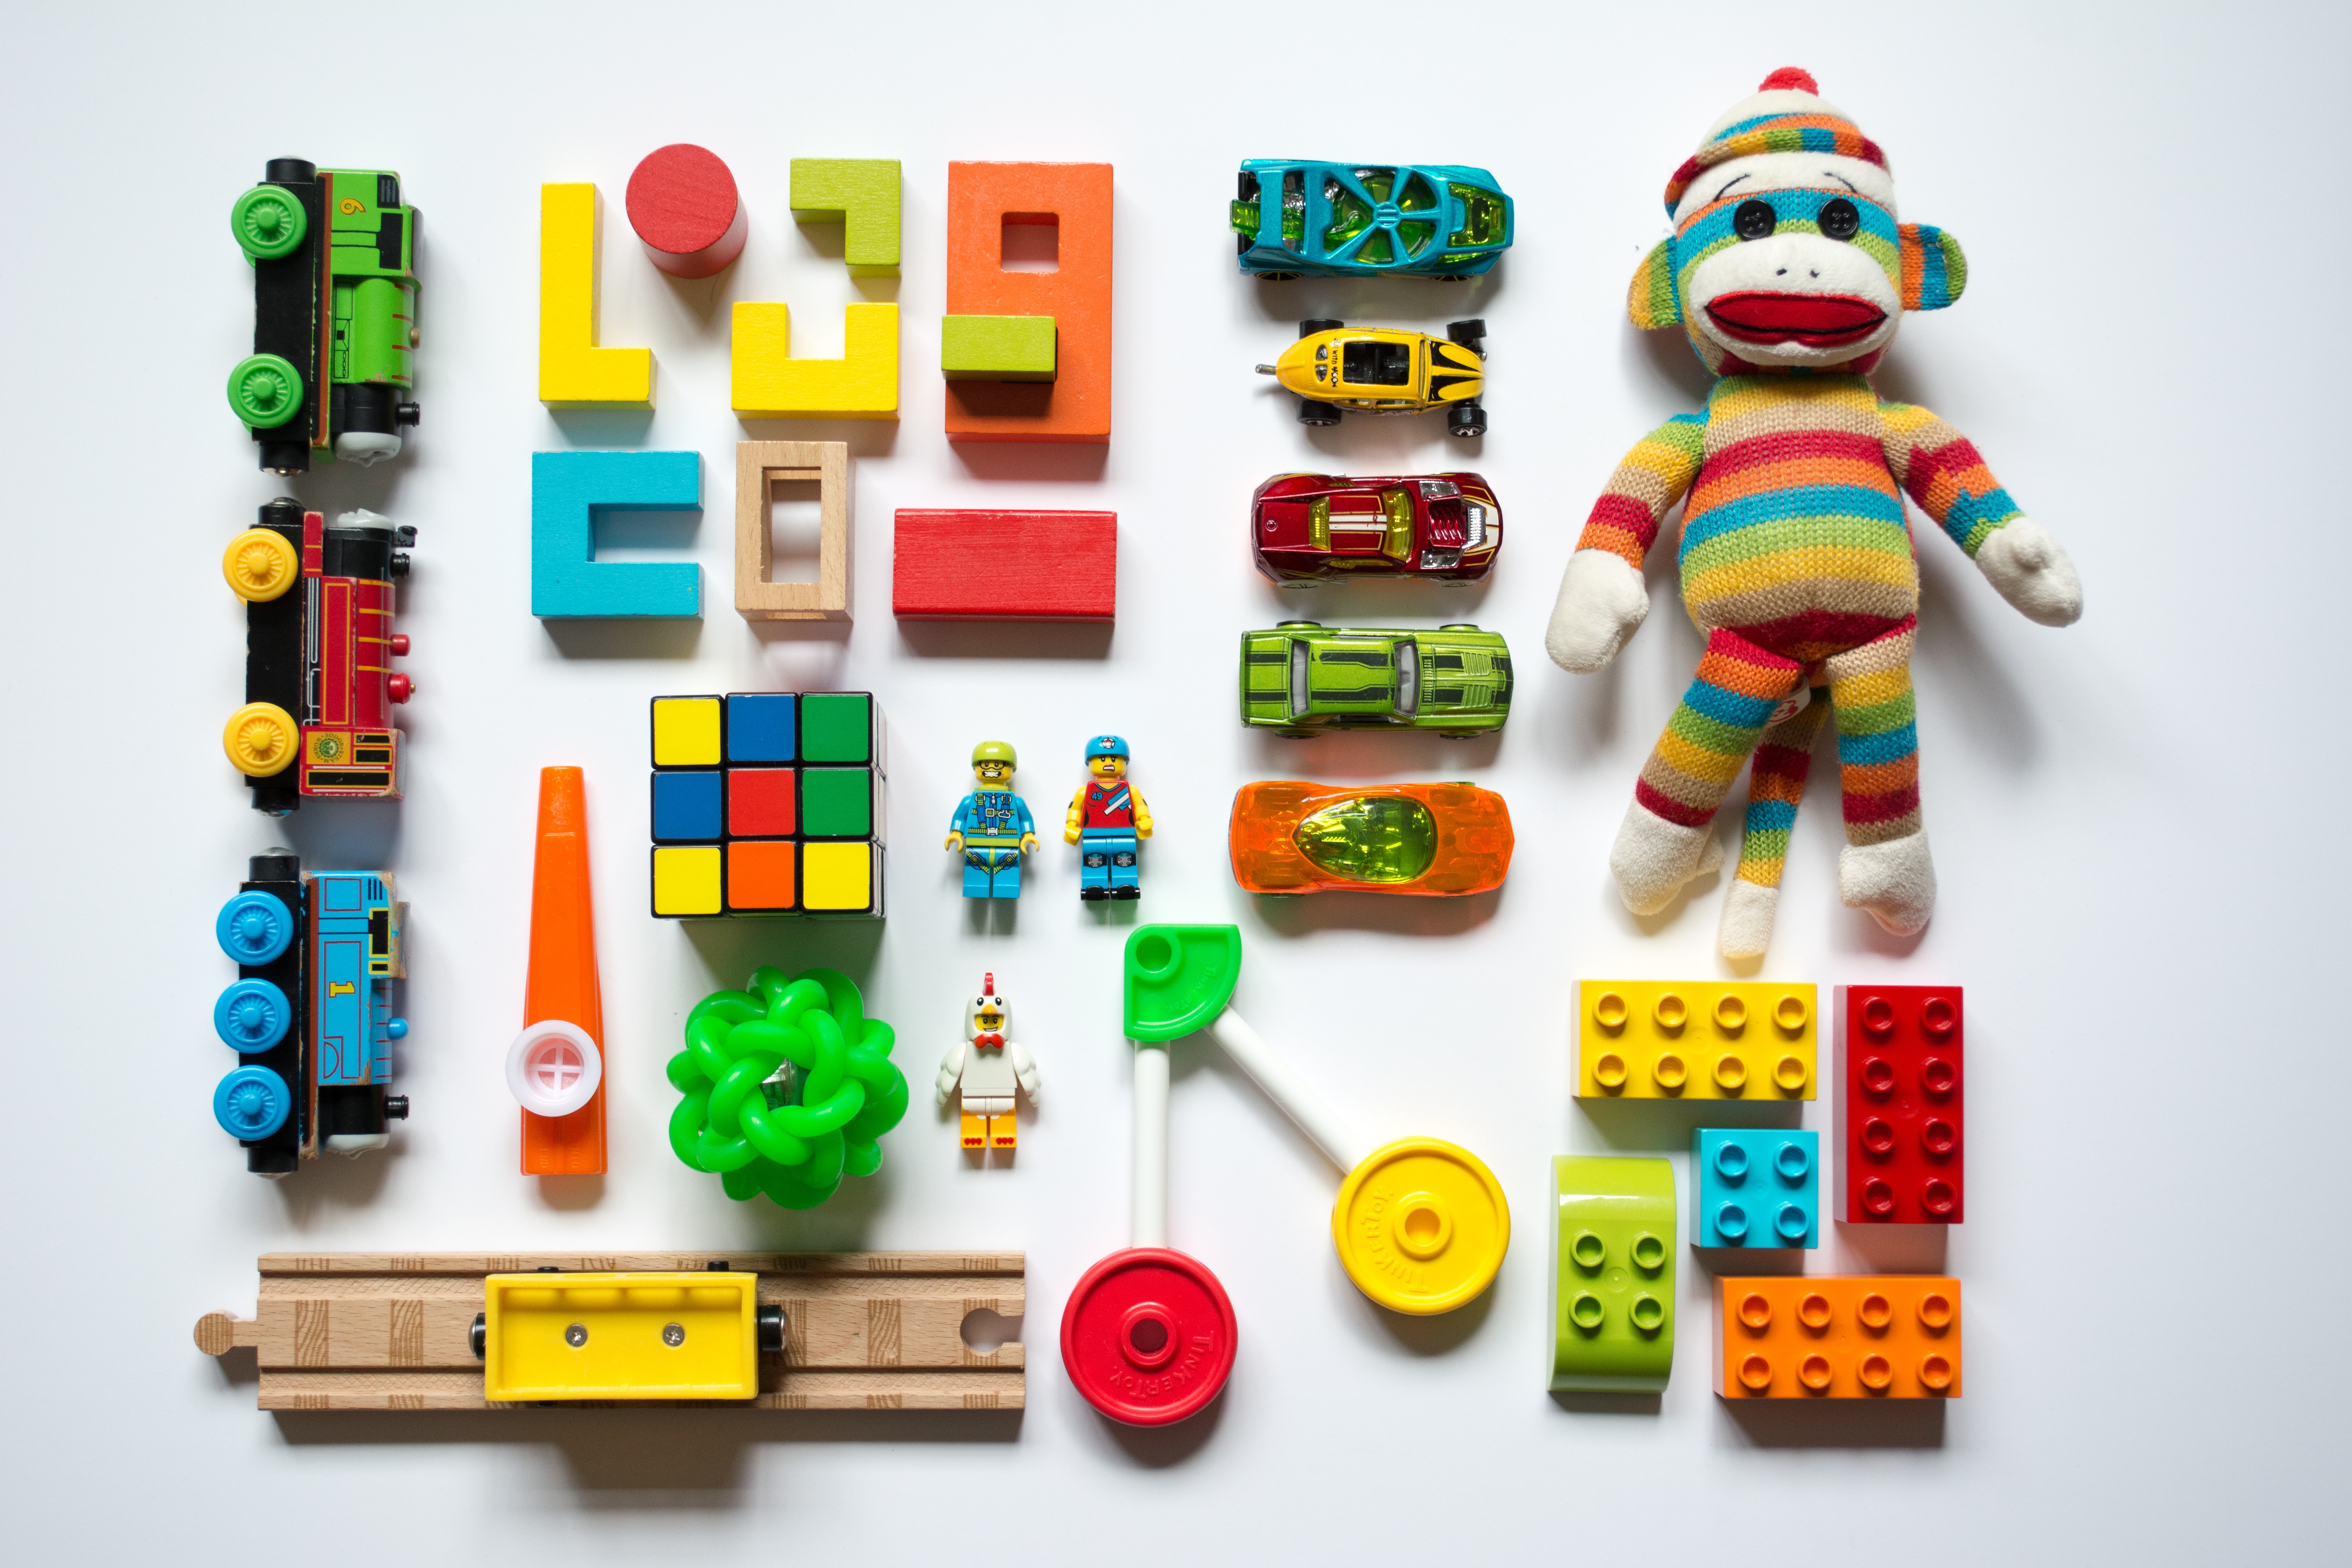 Most materials are recyclable, so why can't children's toys be